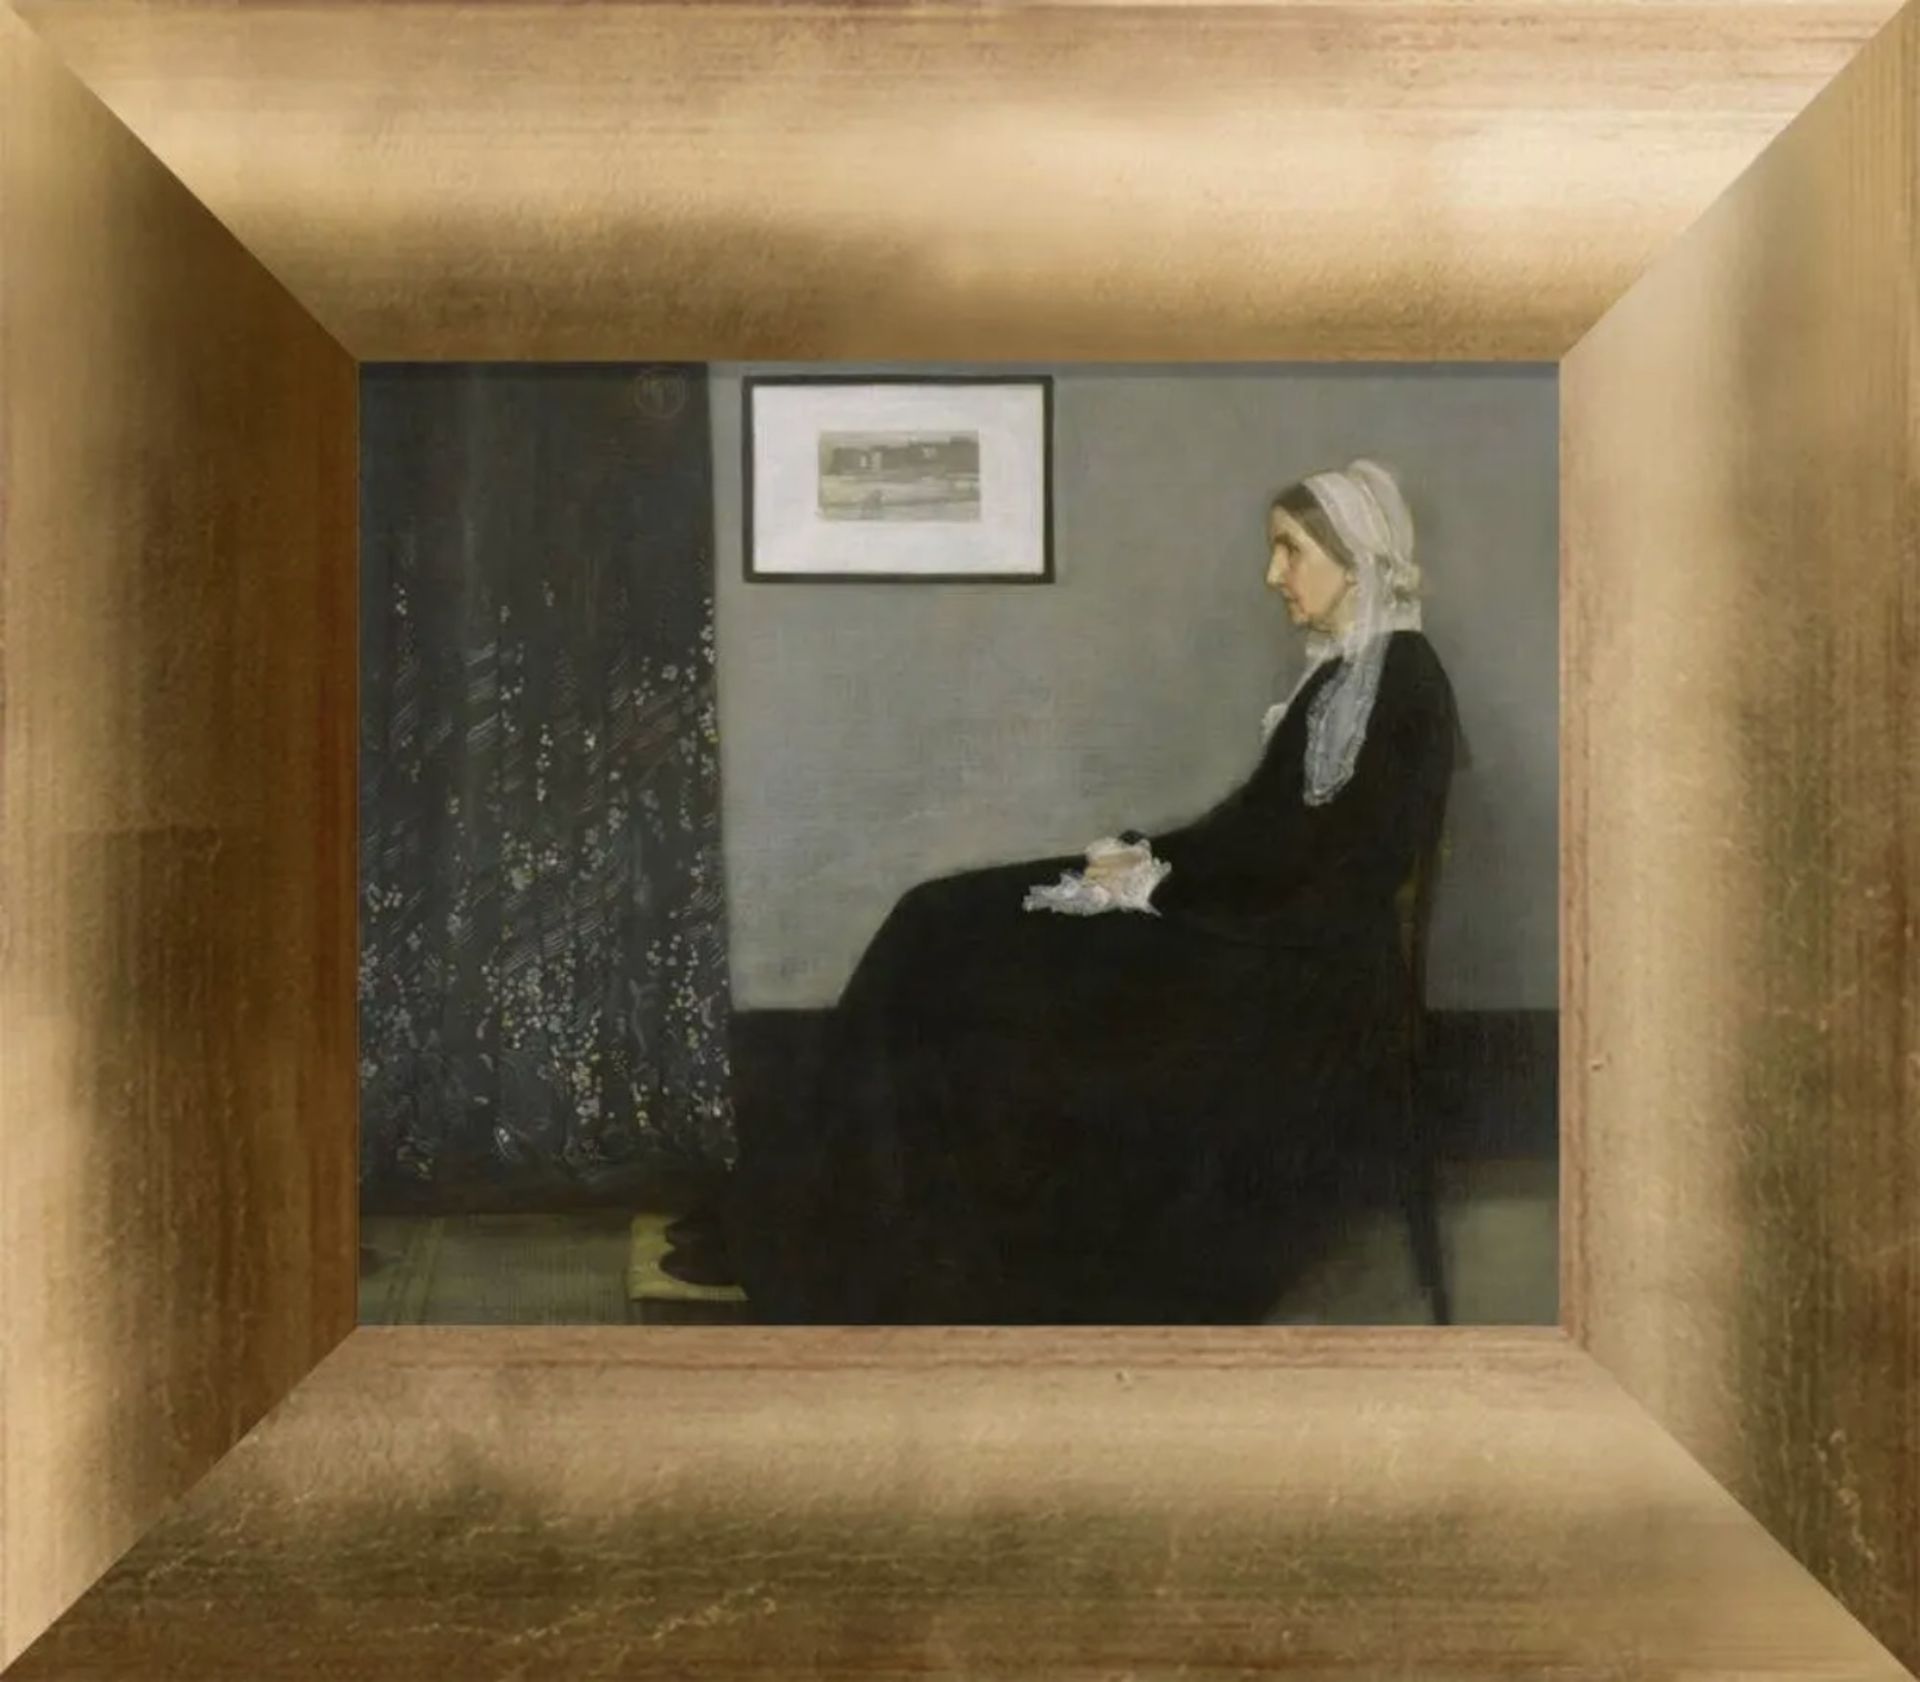 James Whistler "Mother, 1871" Painting